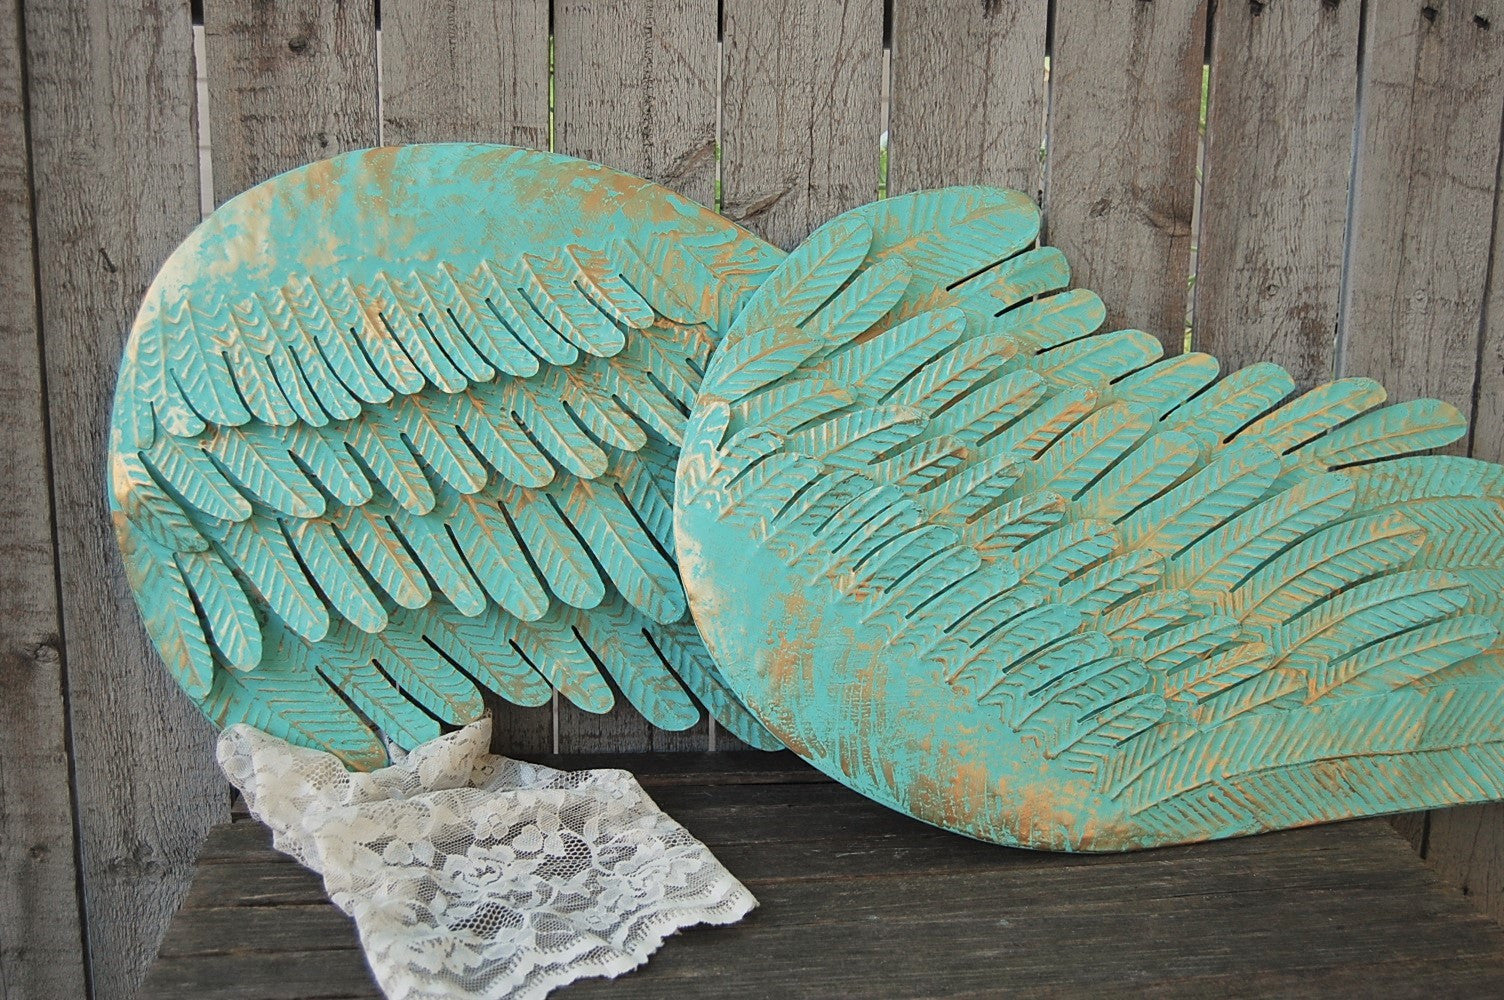 Stunning metal angel wings for crafts for Decor and Souvenirs